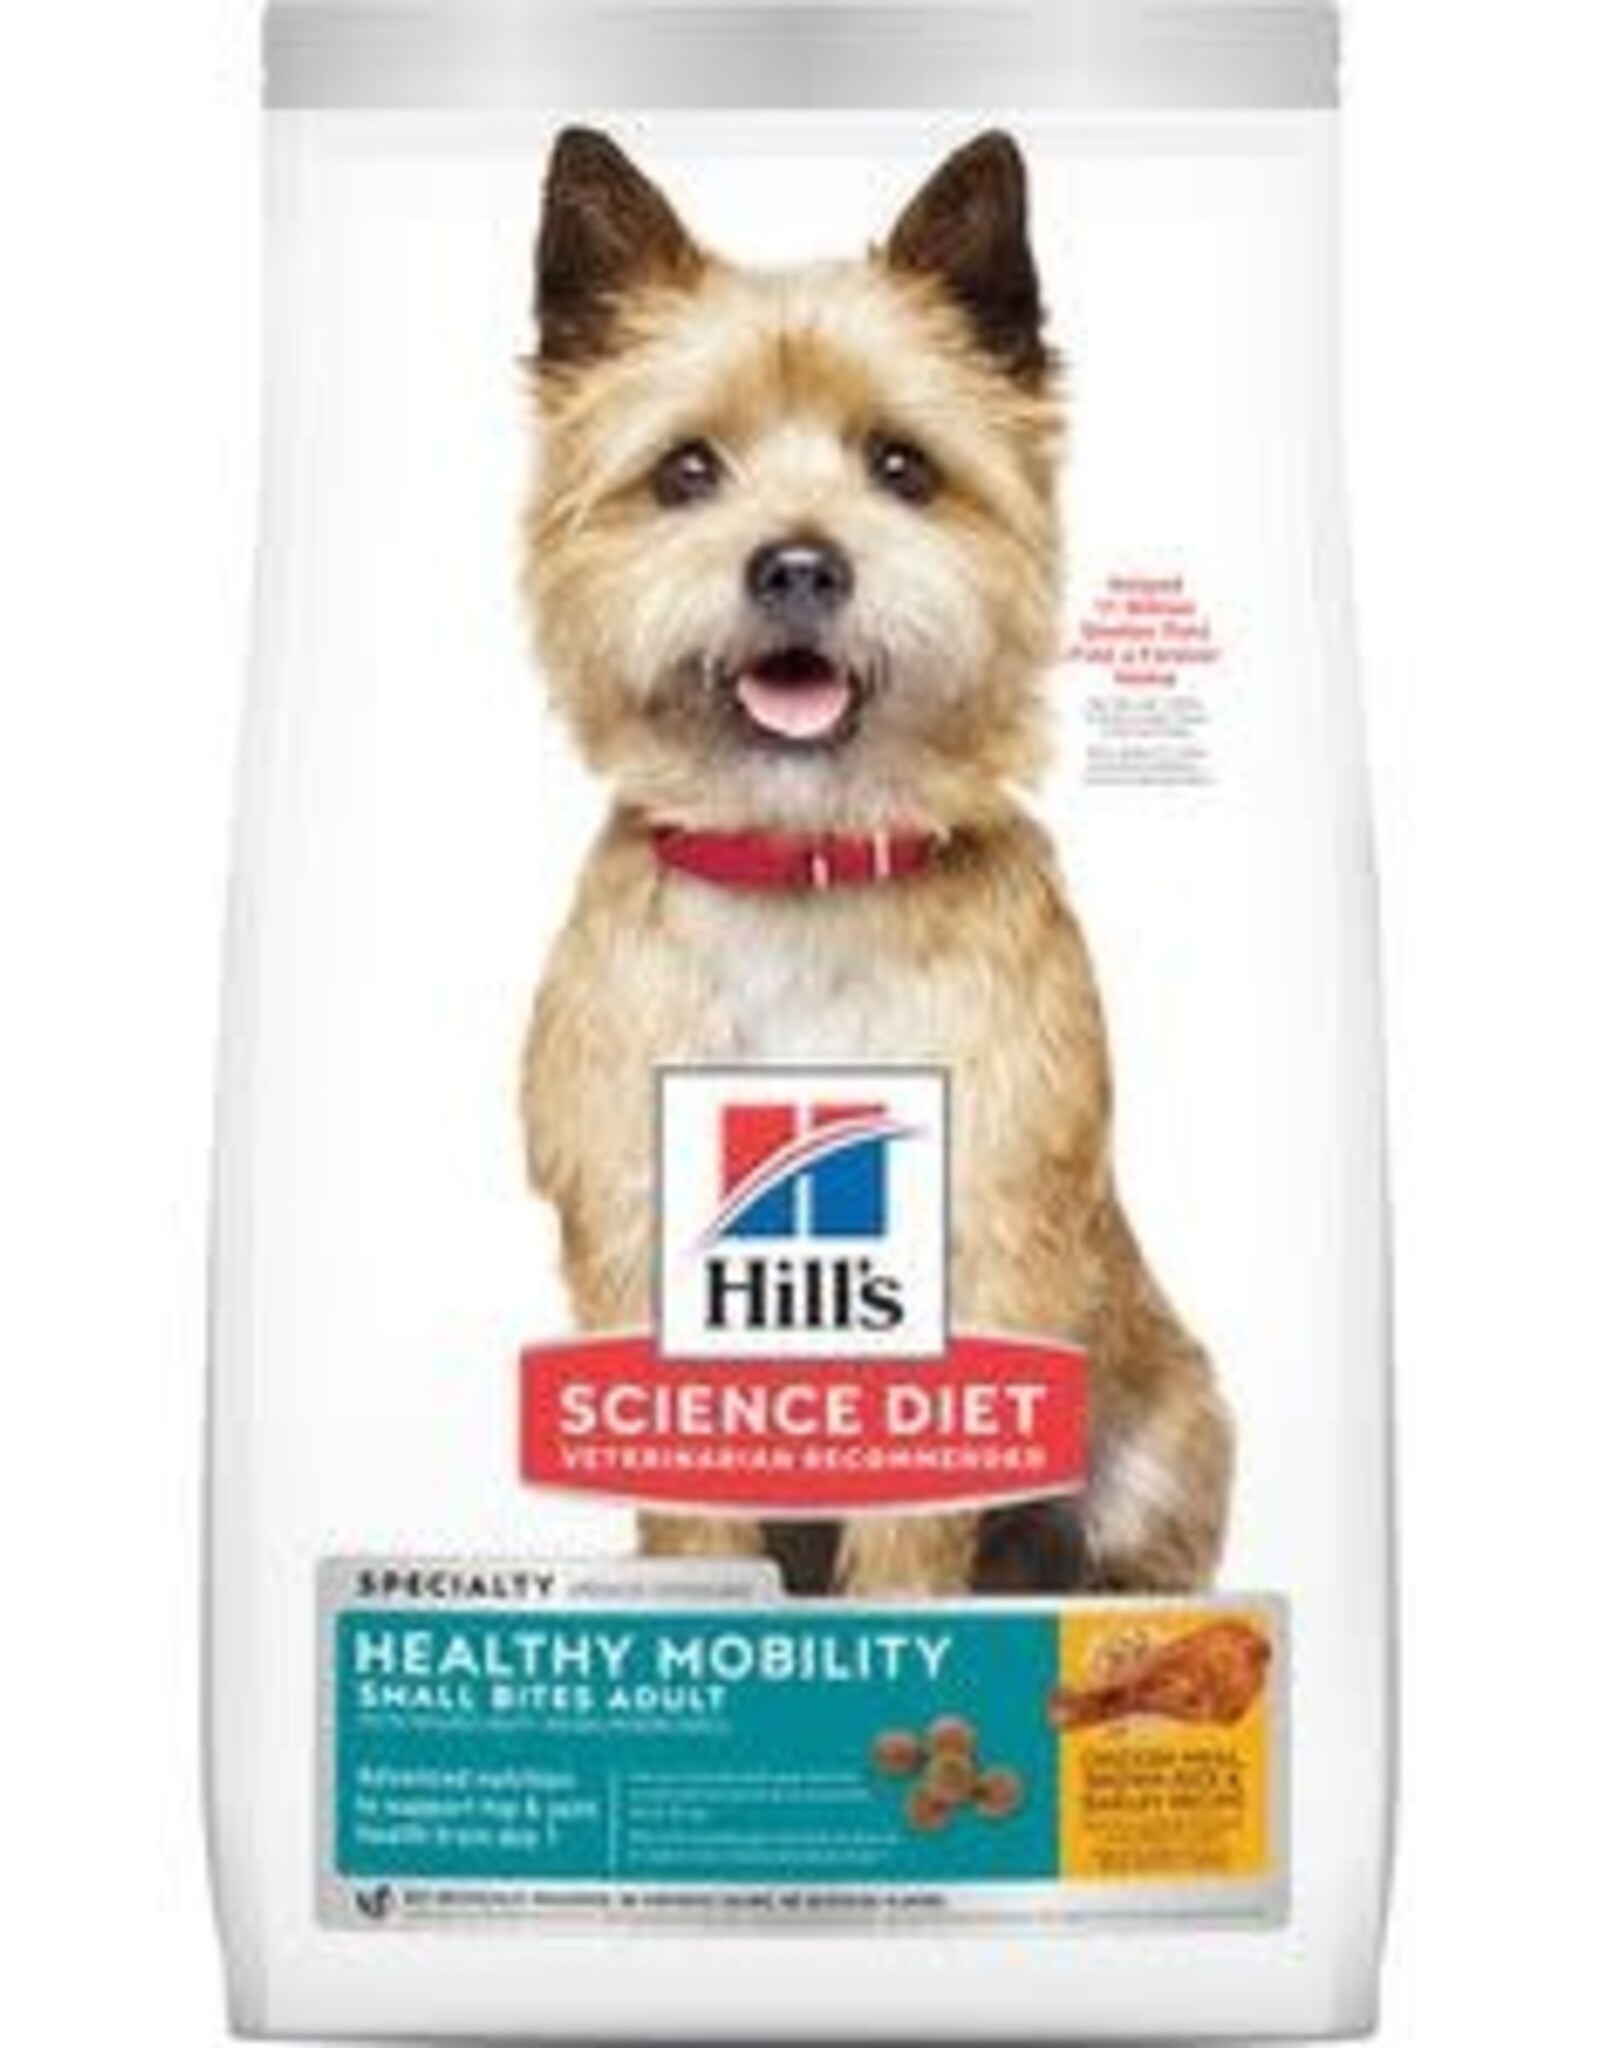 Hill's Science Diet Canine ADULT Healthy Mobility Small Bites  15.5 lb.